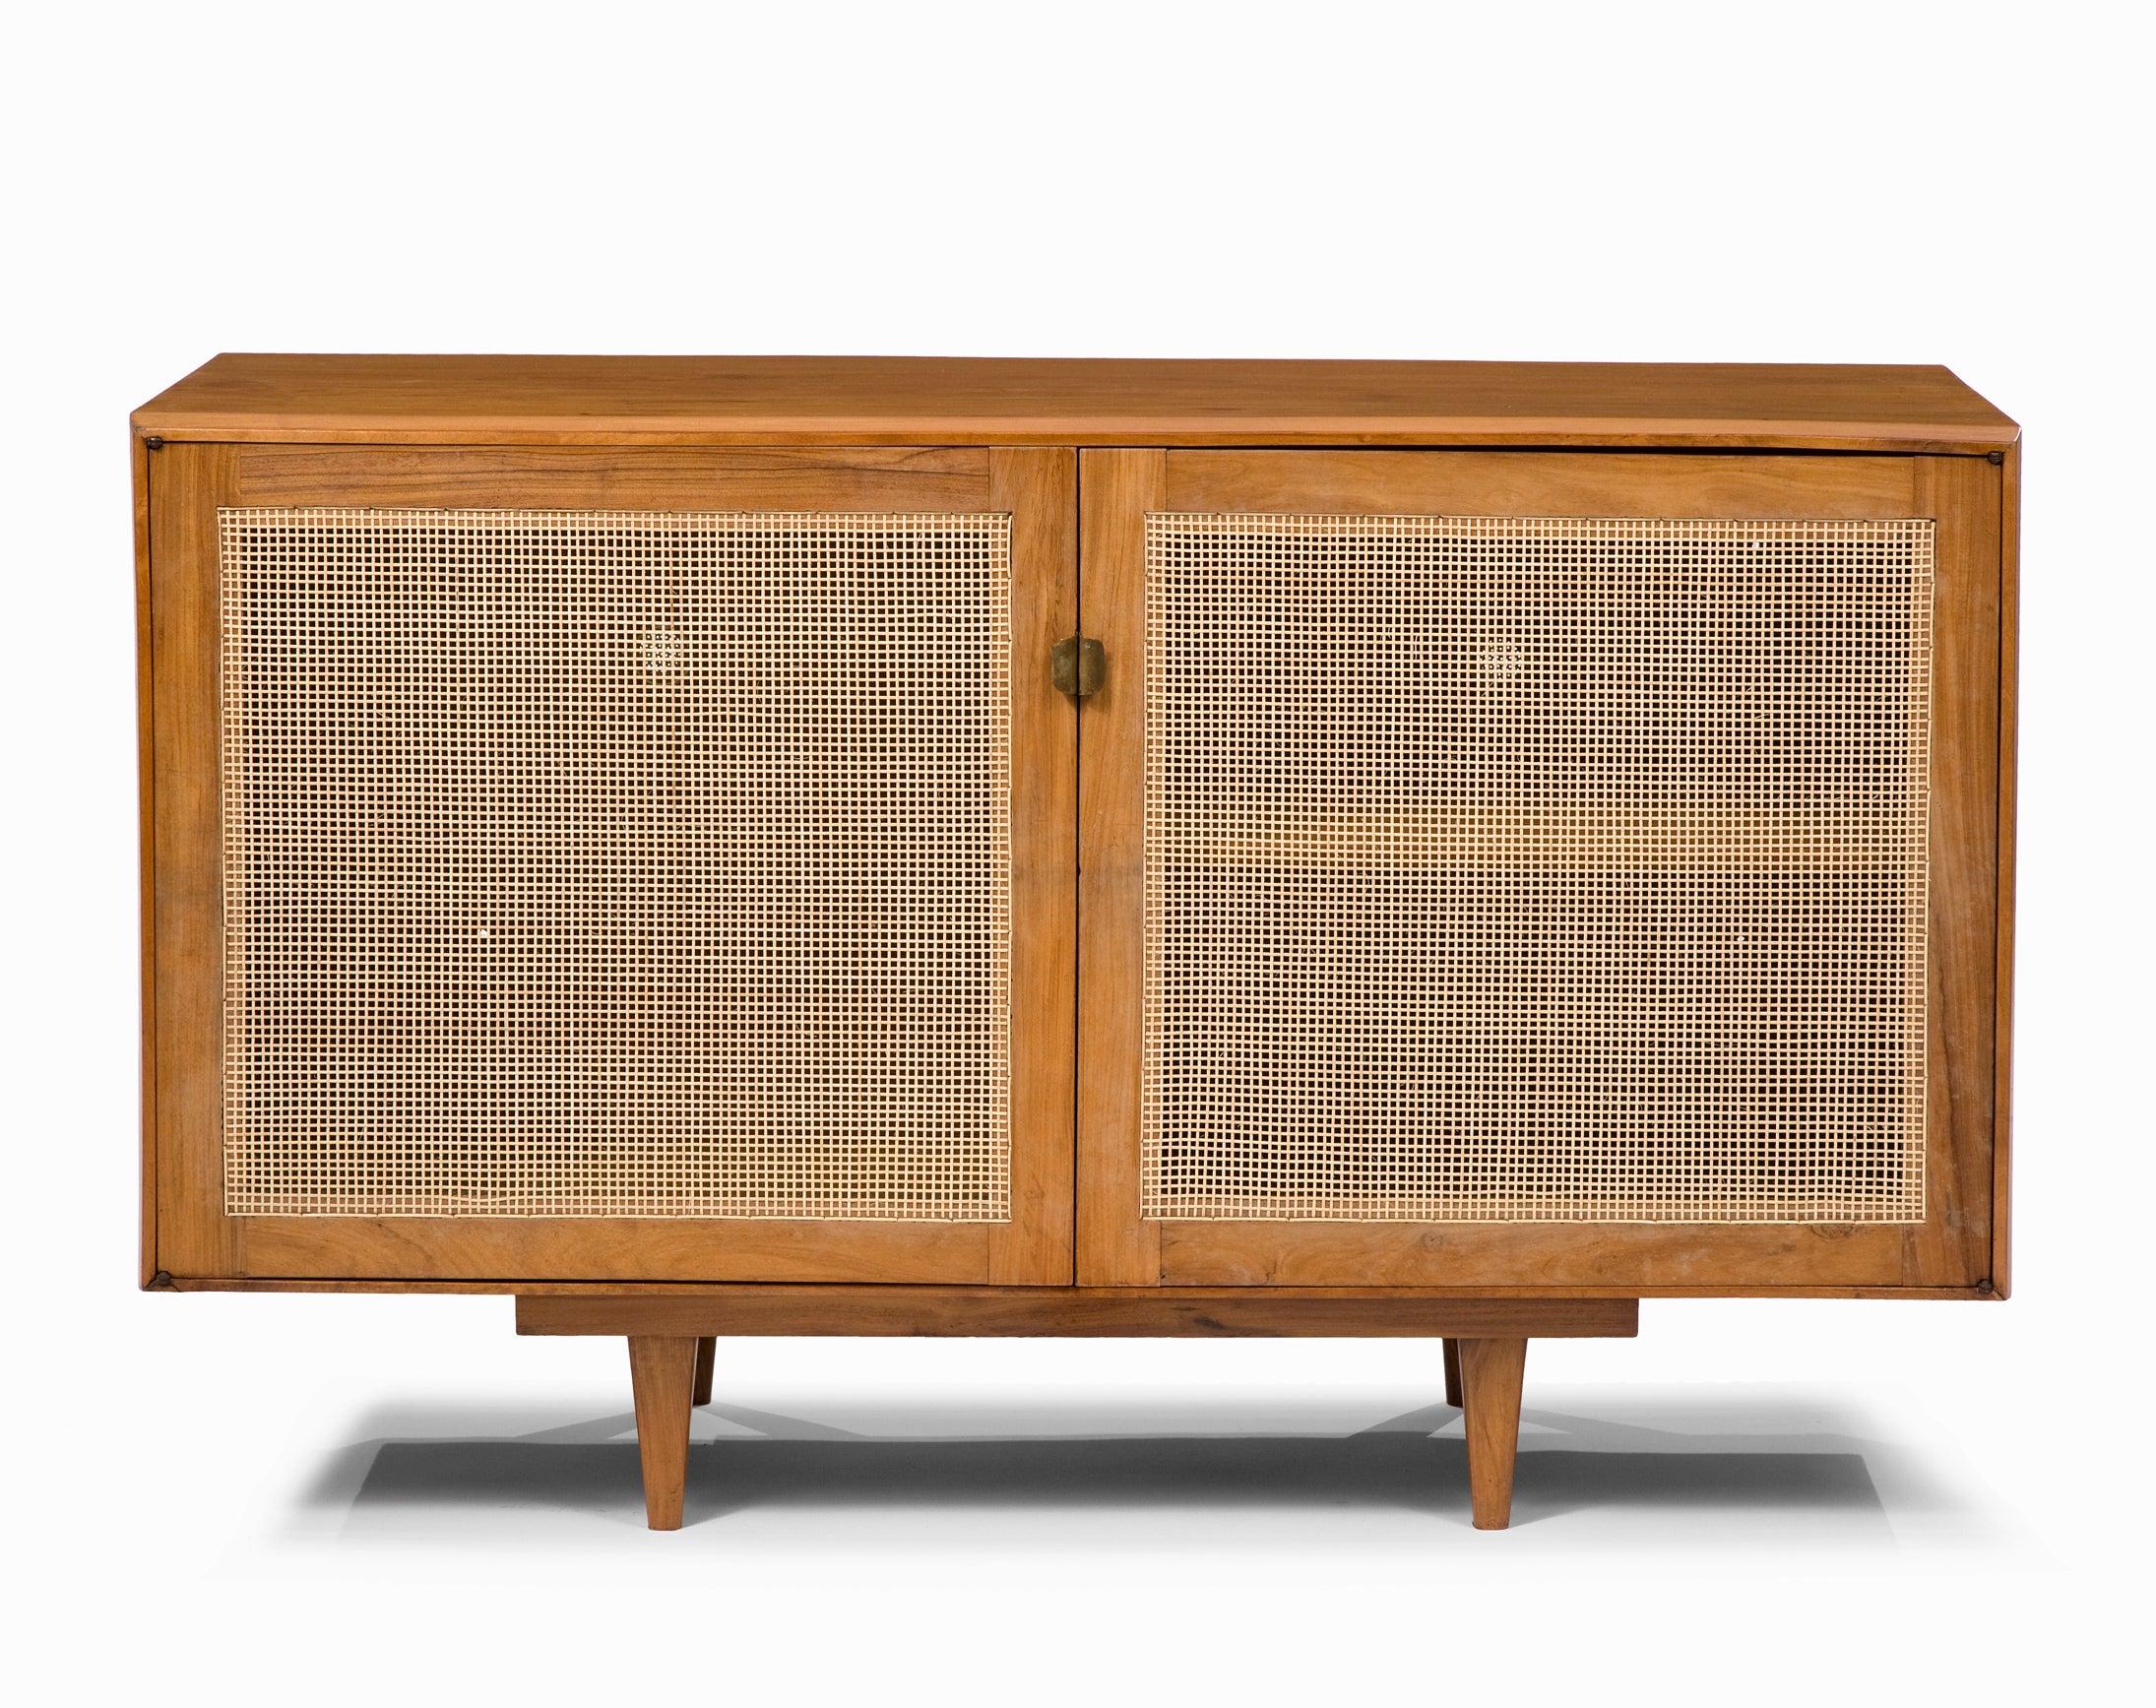 Credenza in caviona wood with cane front. Designed by Martin Eisler for Forma, Brazil,
1960.